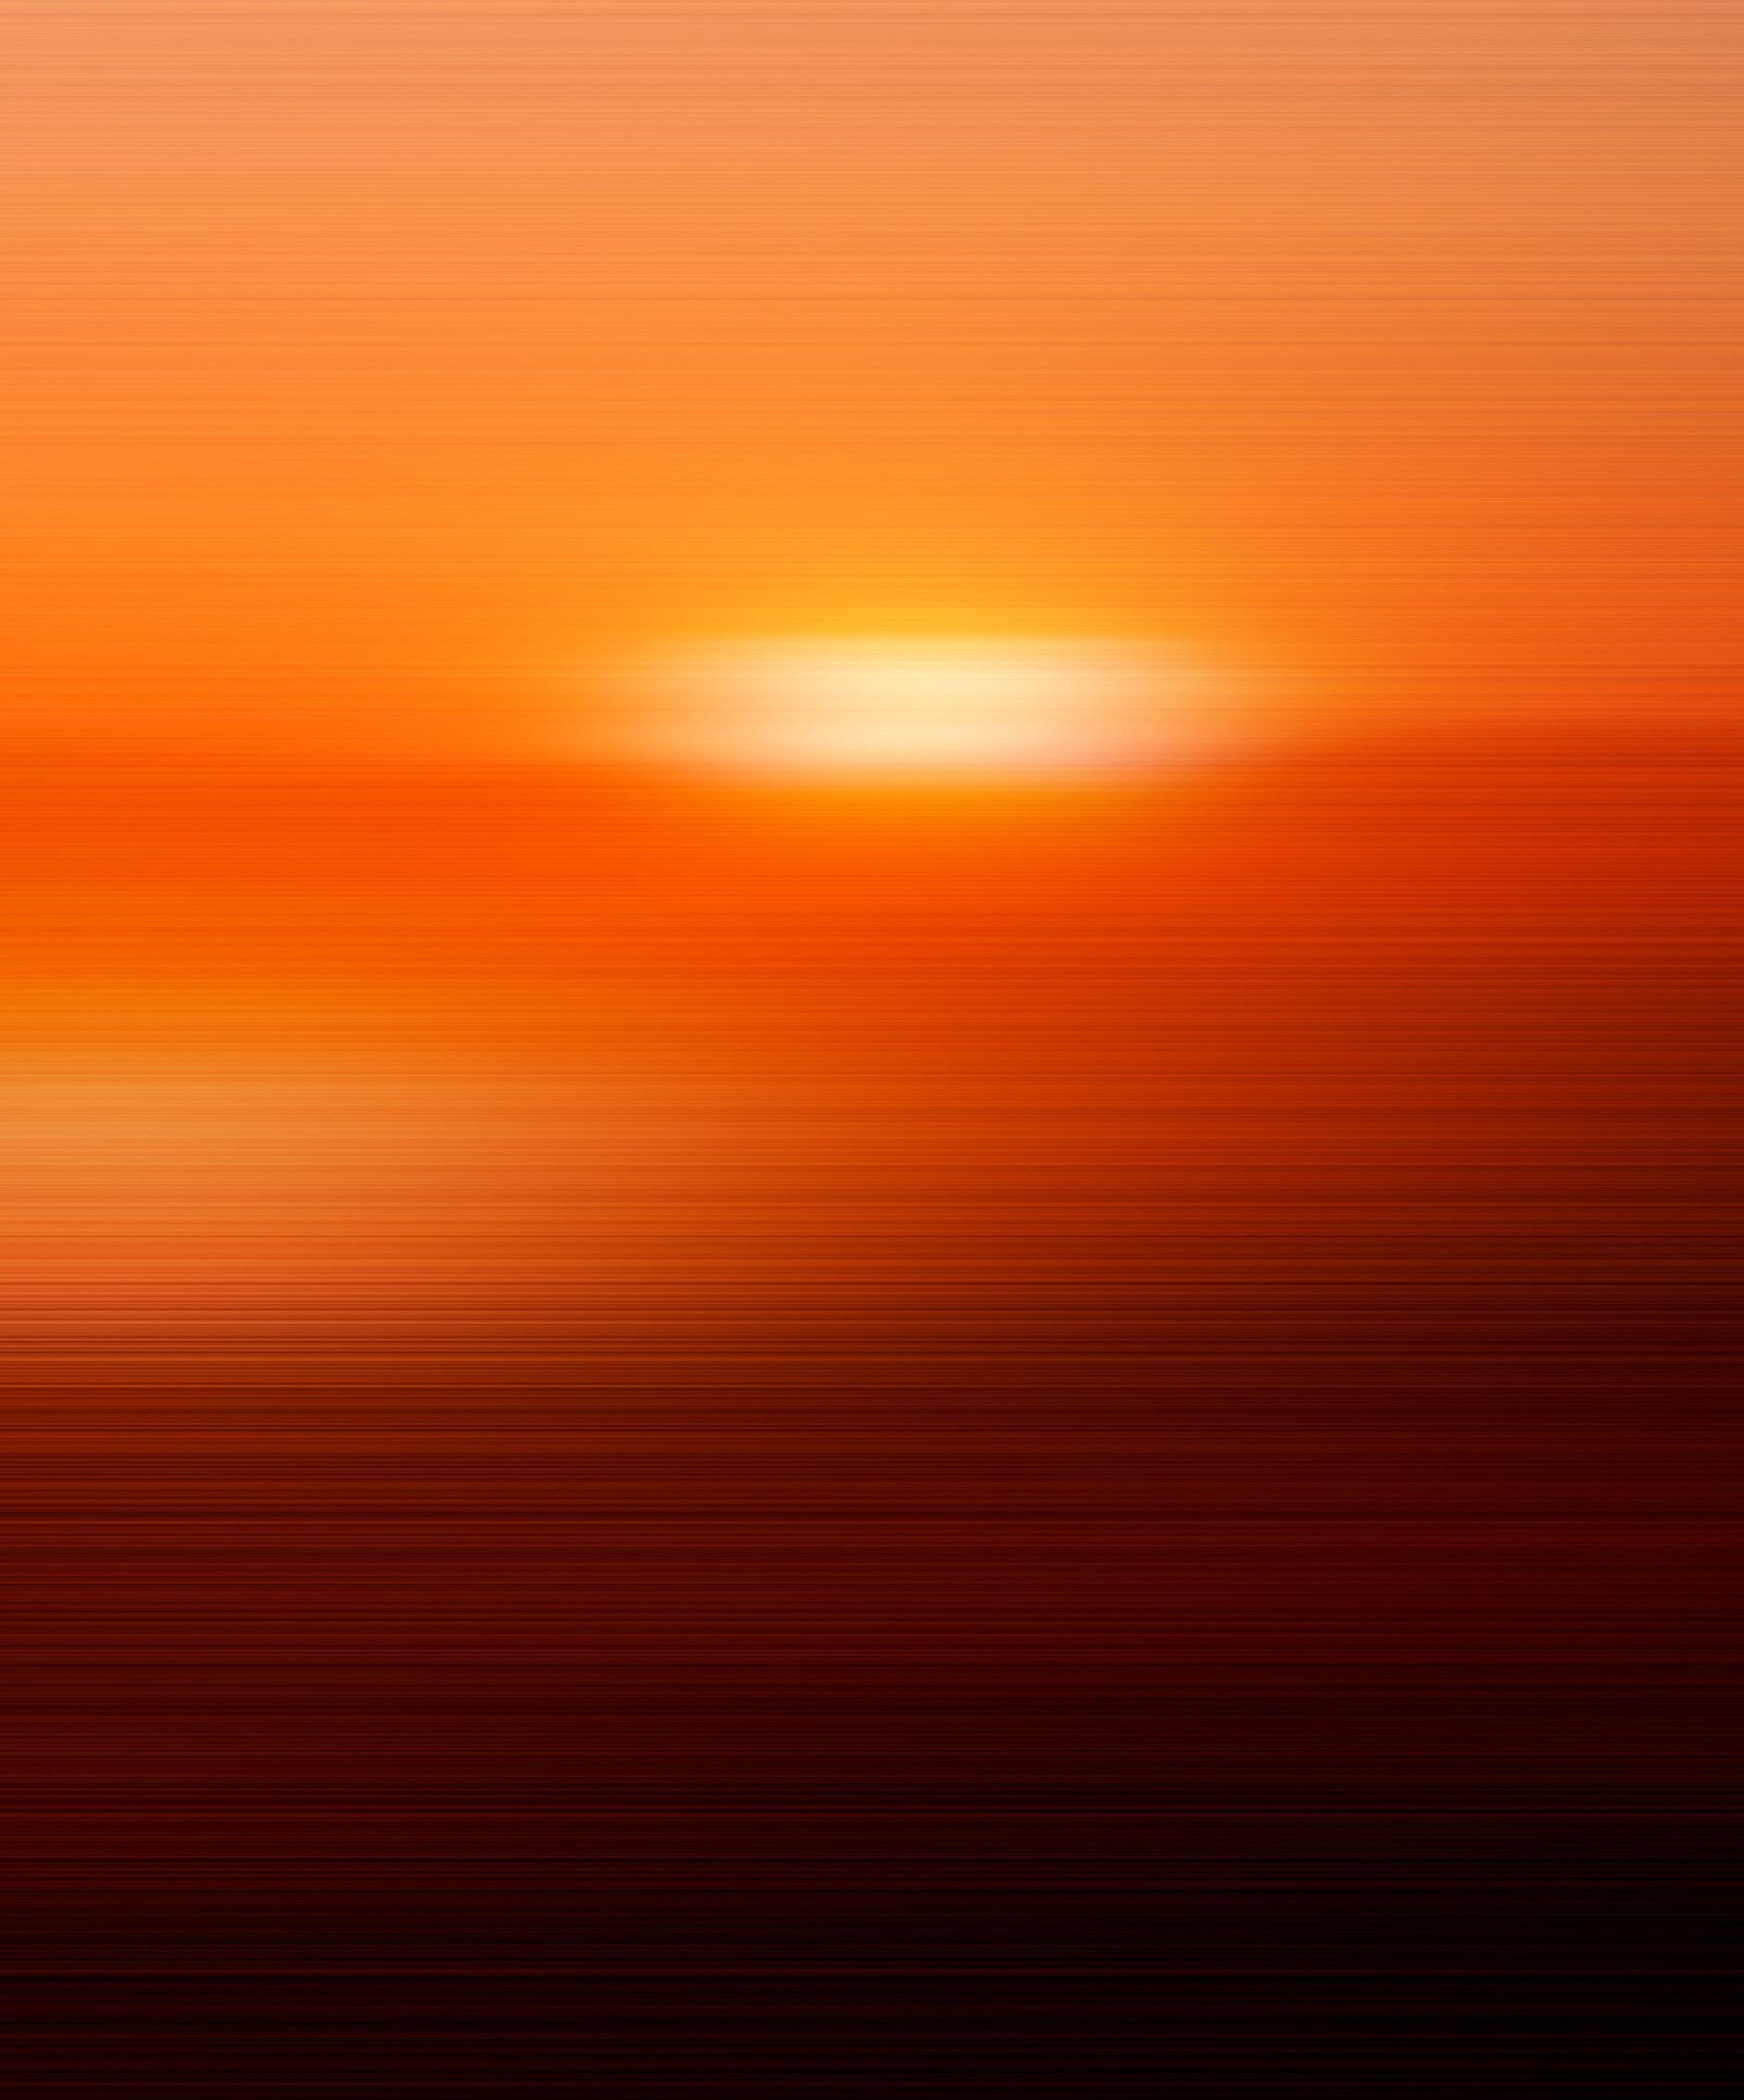 Day - red, orange, sunrise, dawn, abstracted landscape, photography on dibond - Photograph by Etienne Labbe